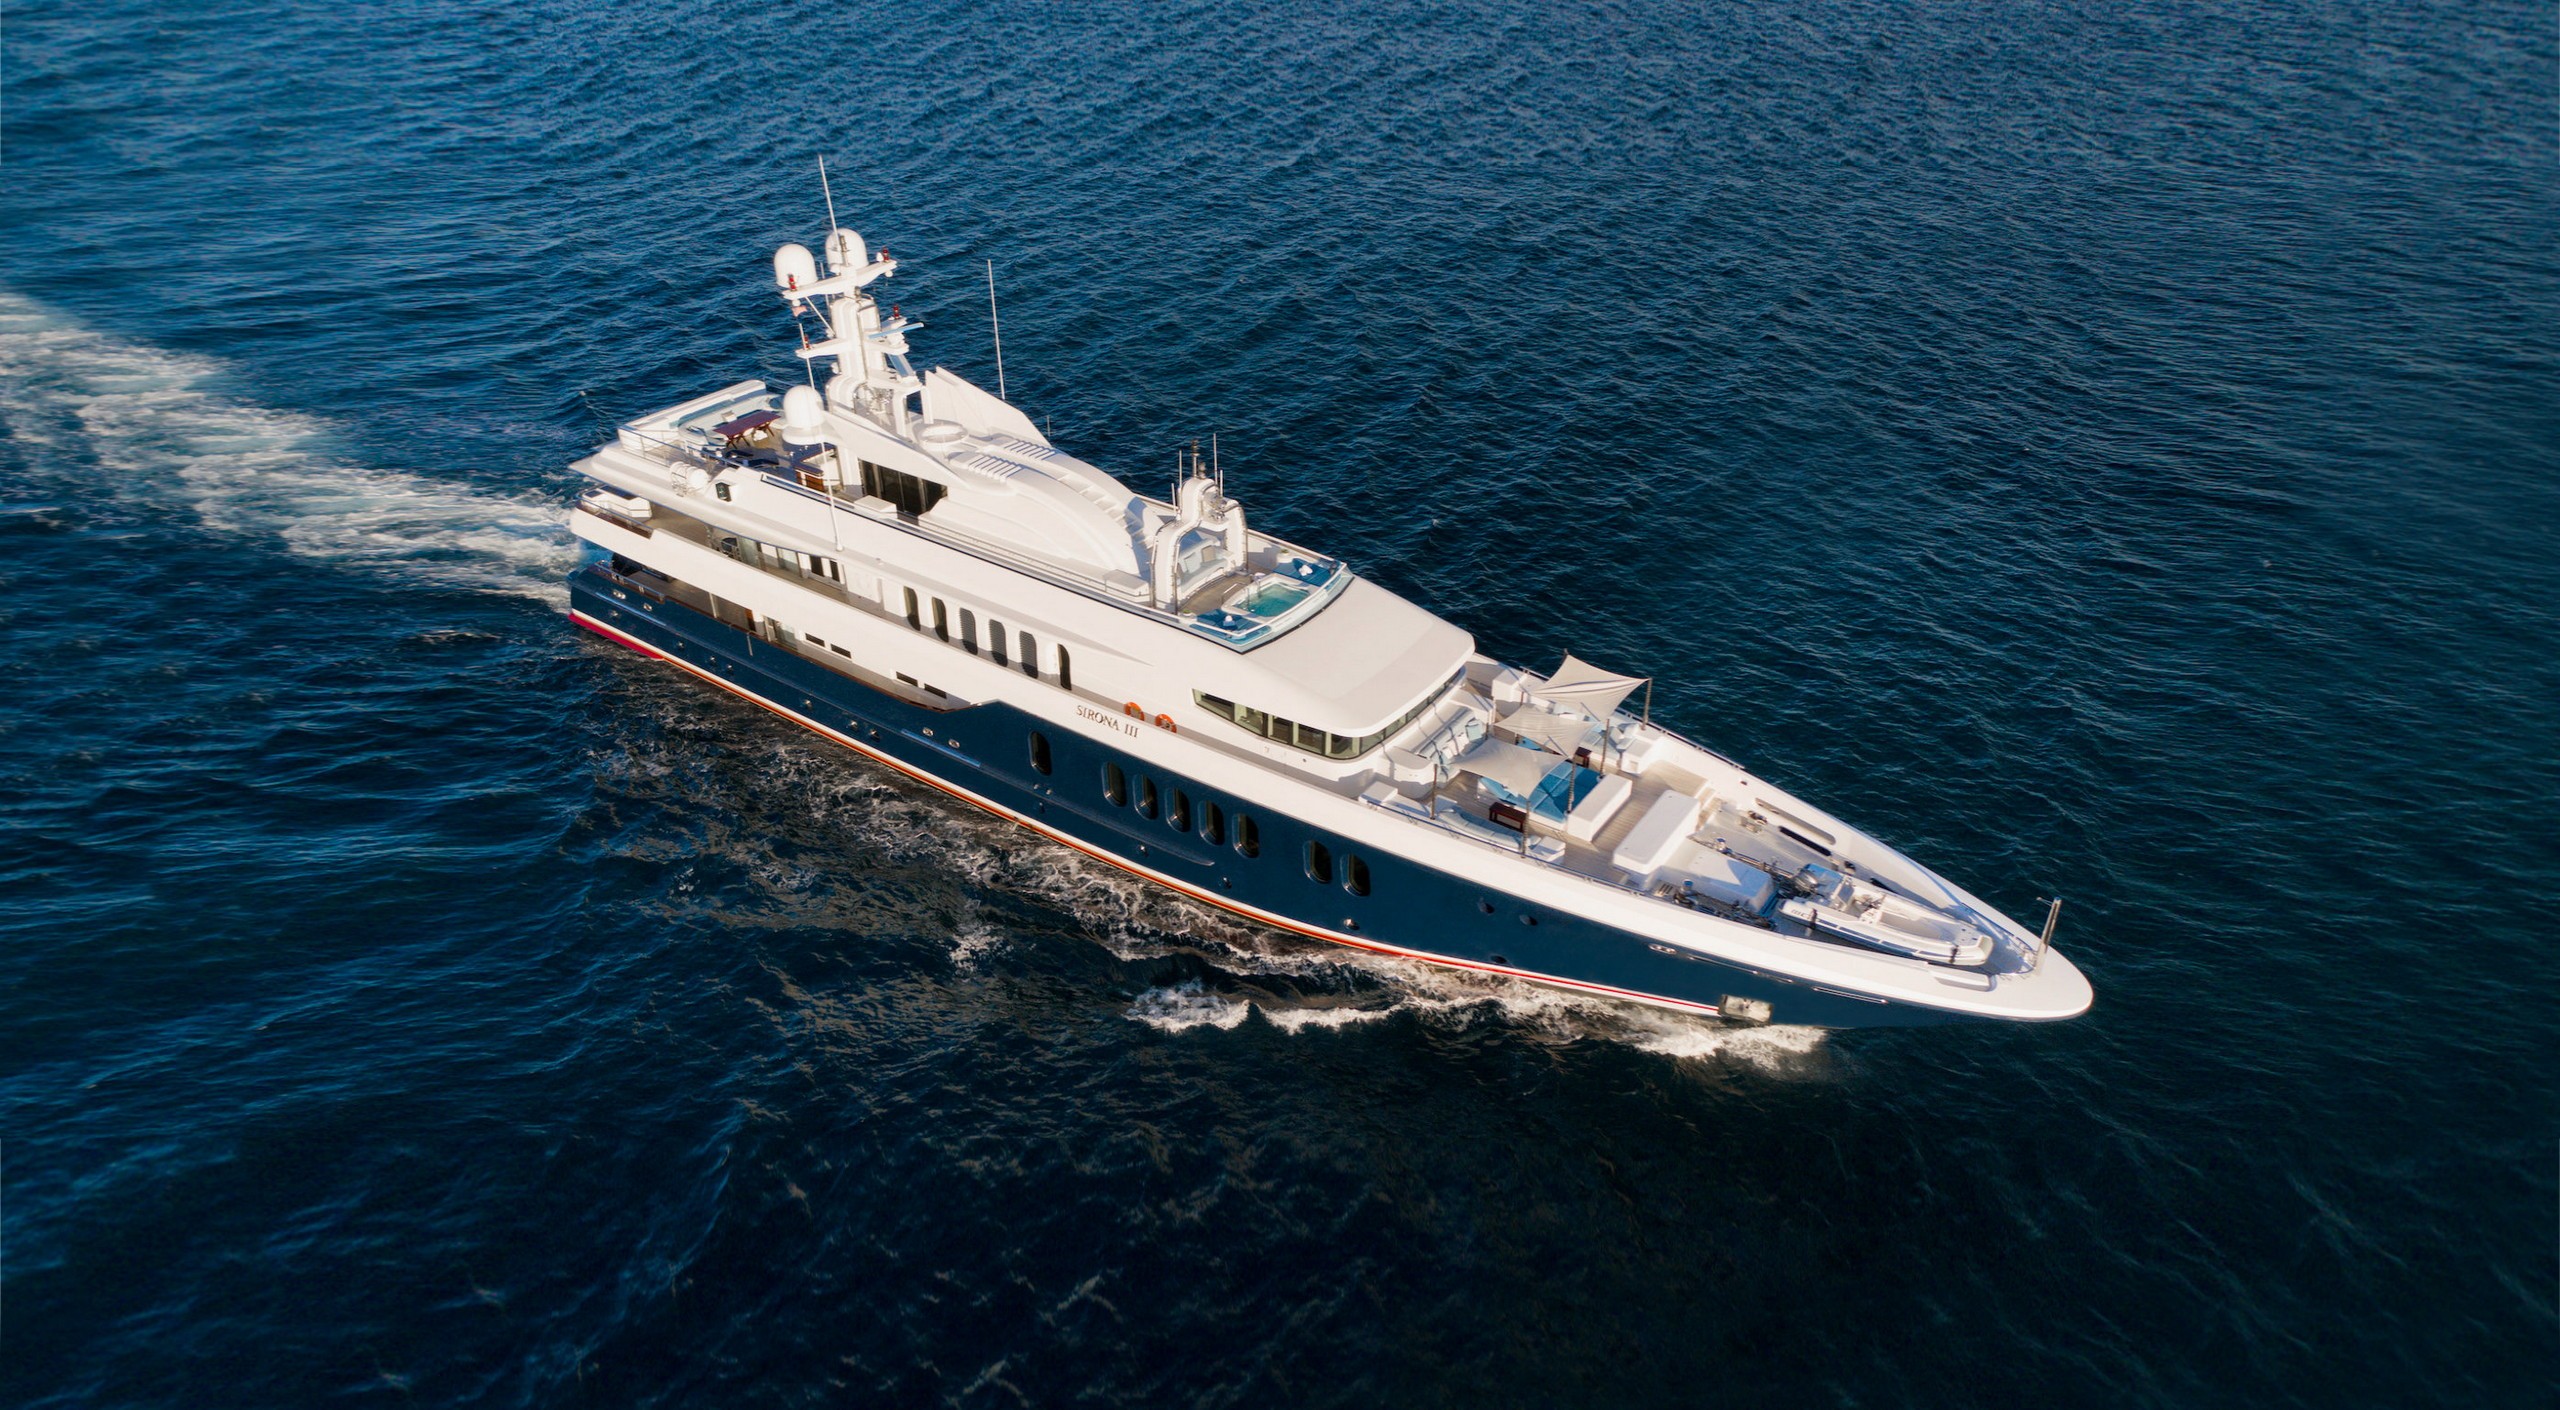 Art Basel to feature Cheetos dust exhibition on mega-yacht